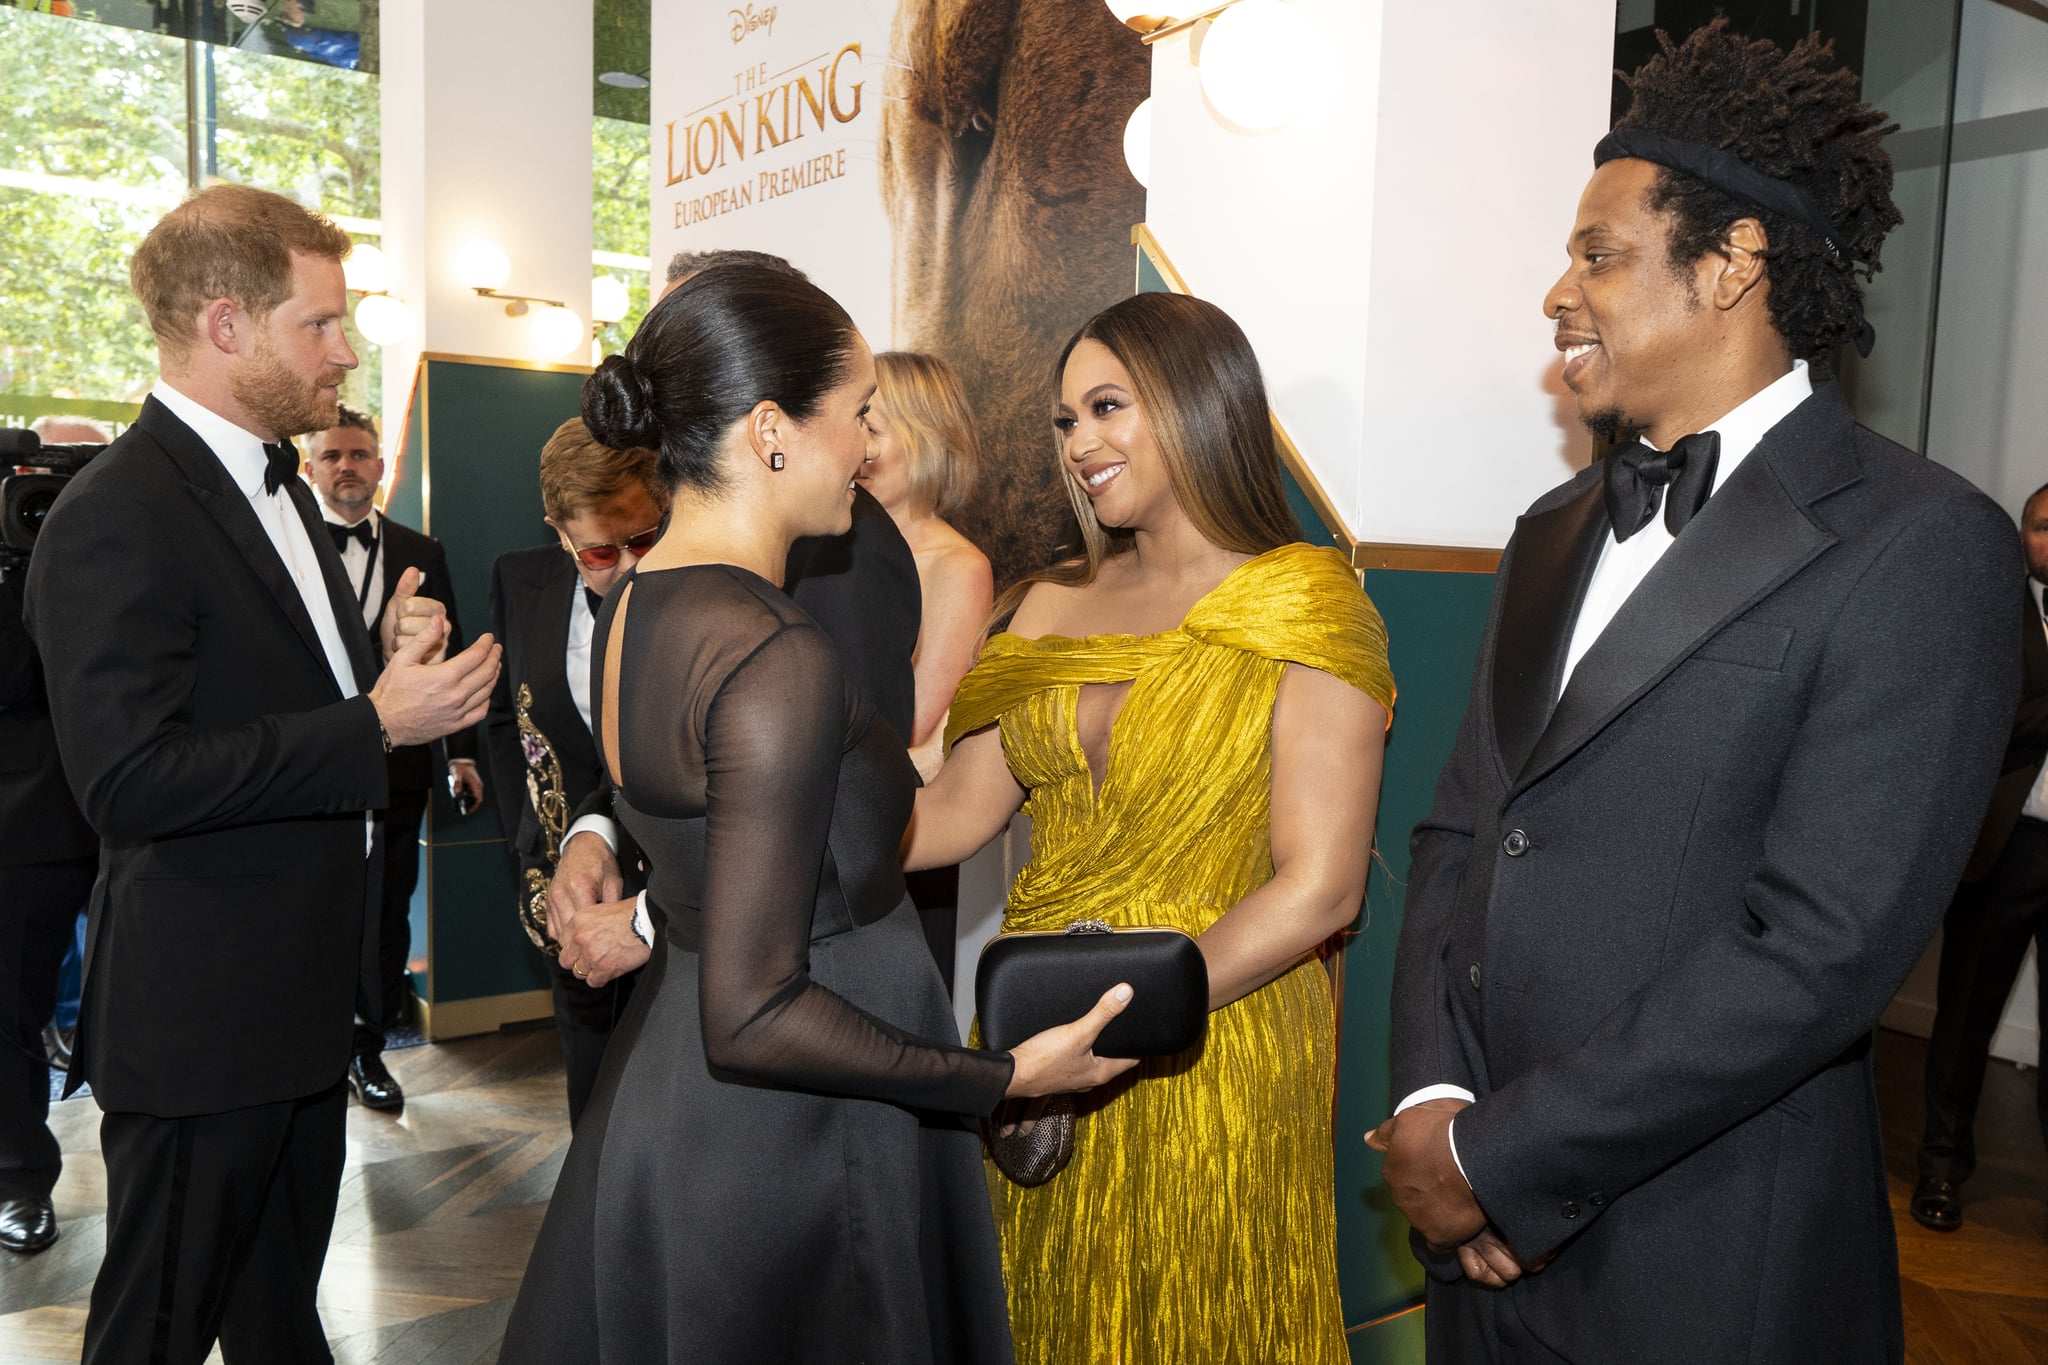 LONDON, ENGLAND - JULY 14: Prince Harry, Duke of Sussex (L) and Meghan, Duchess of Sussex (2nd L) meets cast and crew, including Beyonce Knowles-Carter (C) Jay-Z (R) as they attend the European Premiere of Disney's